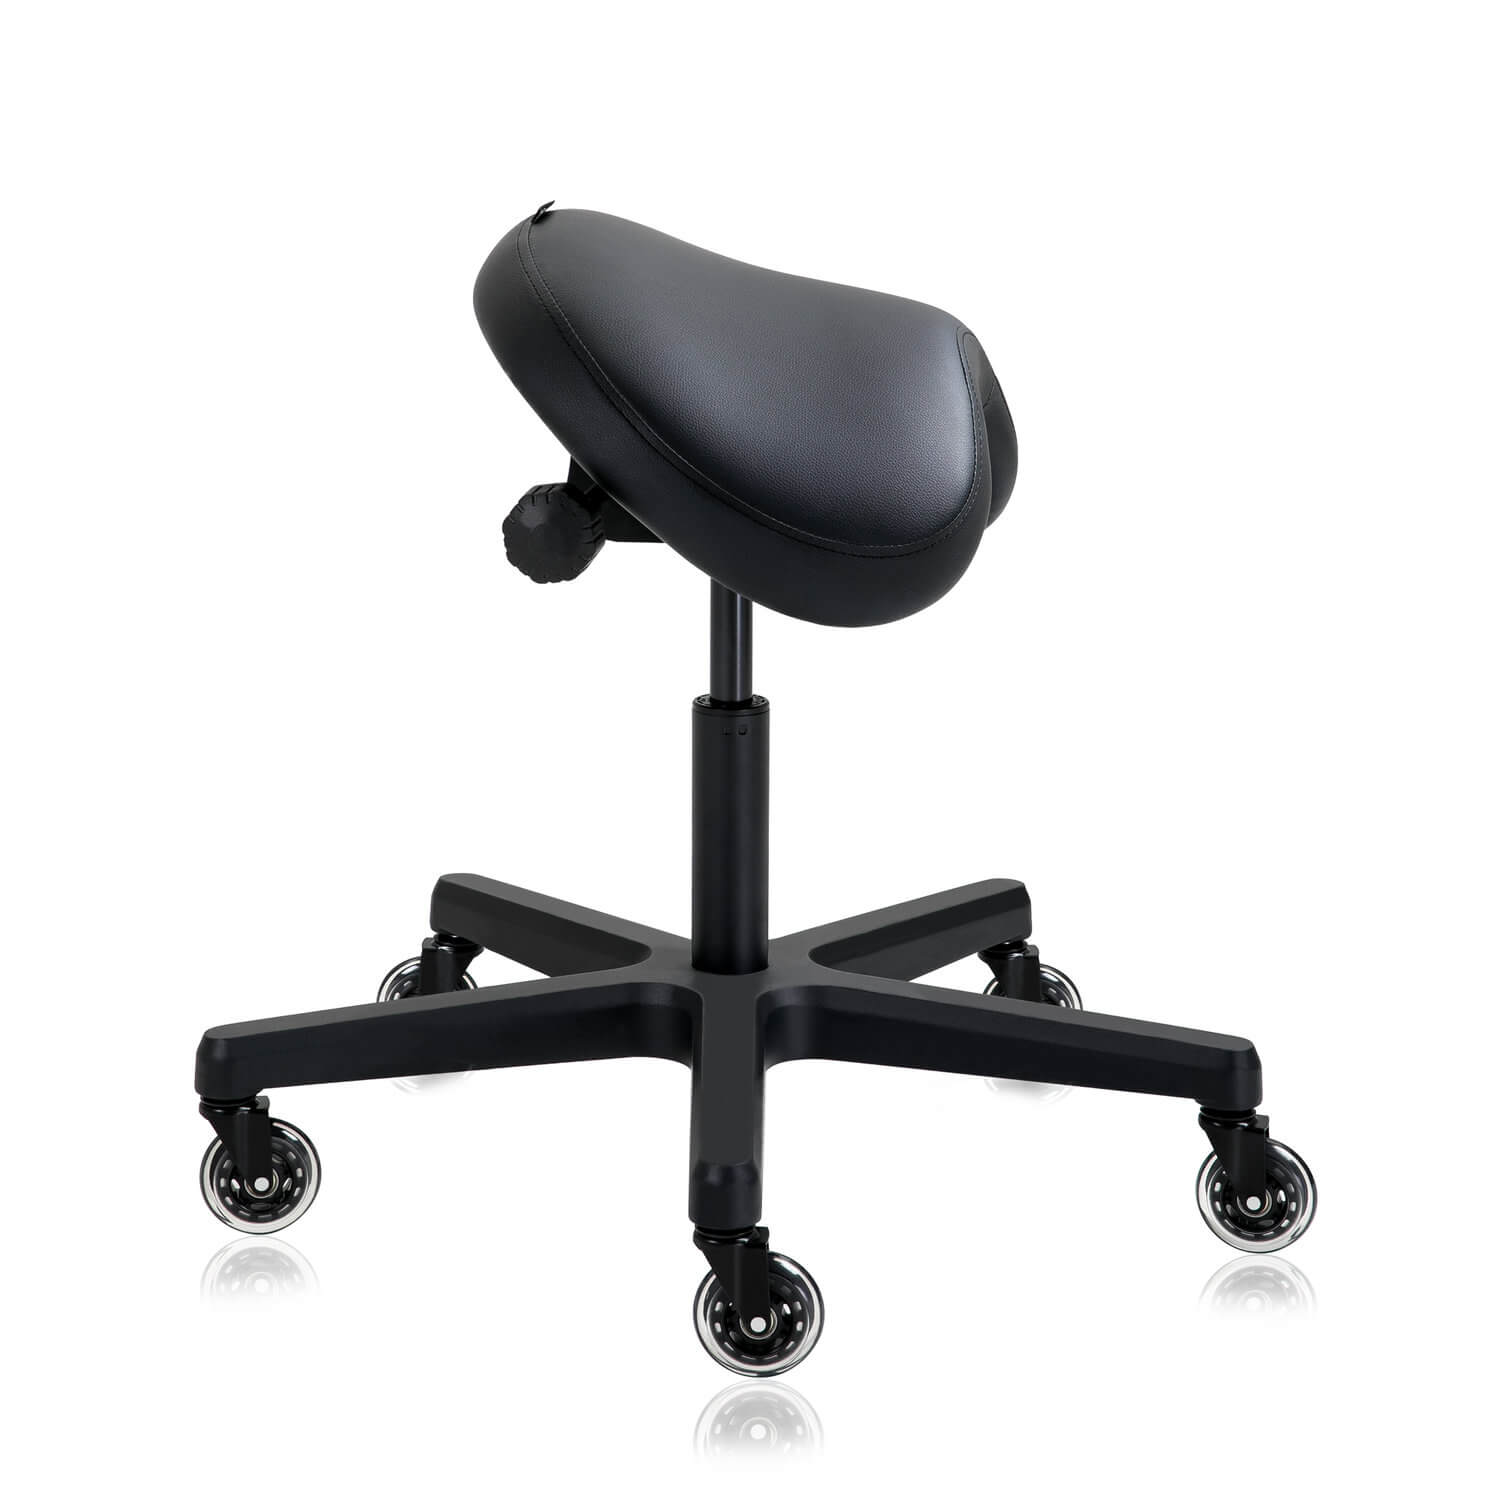 Heavy Duty Ergonomic Saddle Rolling Stool With Tiltable Seat | Sit Healthier